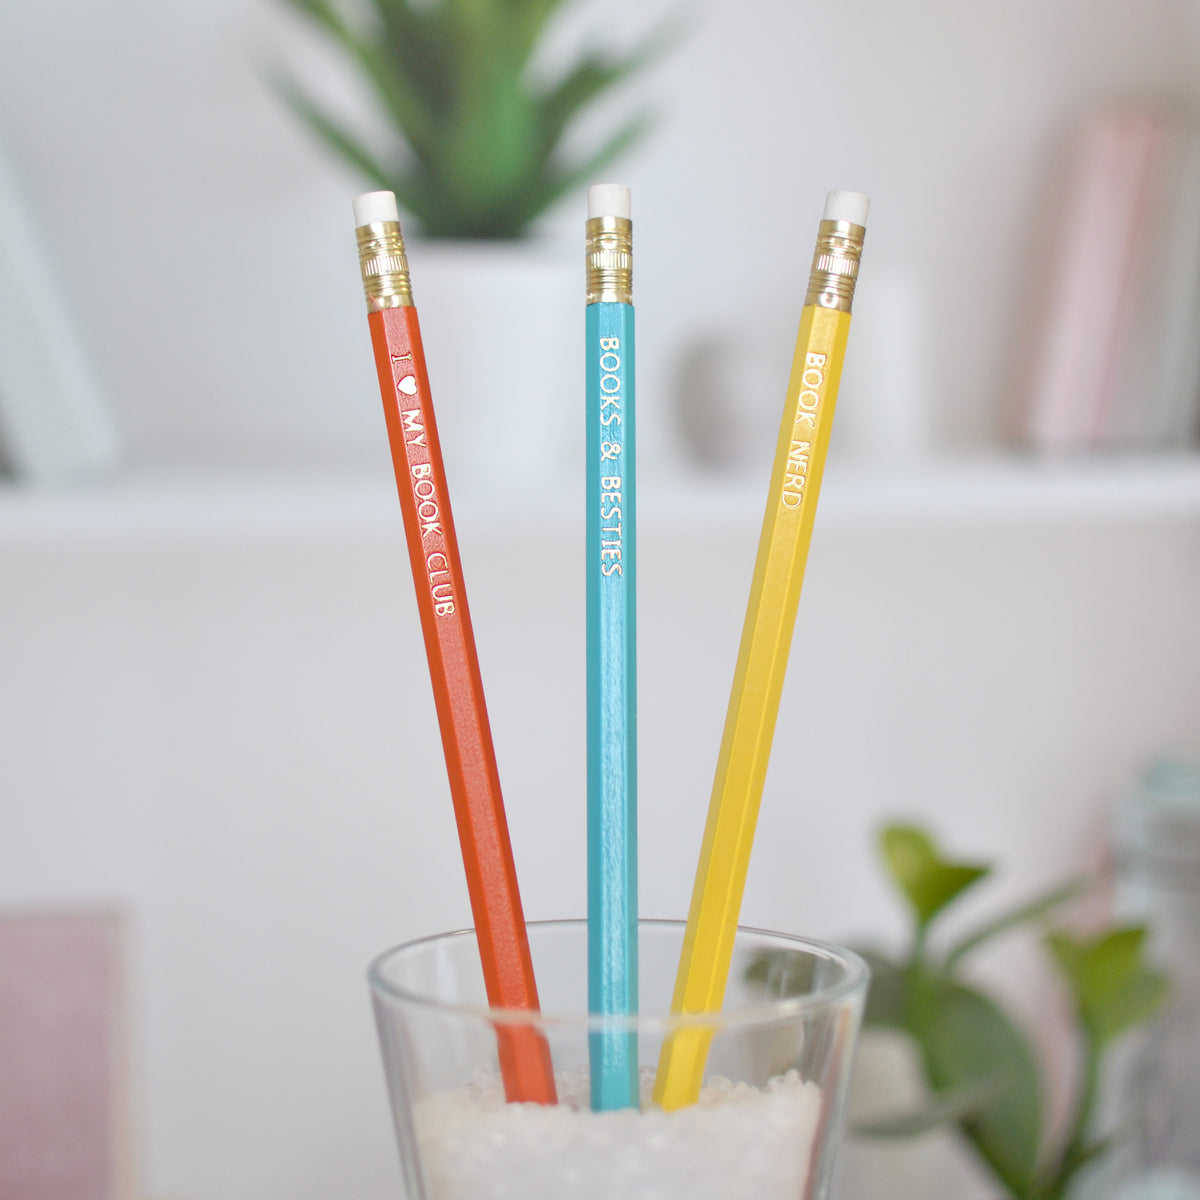 Three Pencils and Bookmark Set for Book Club Besties - I Love My Book Club, Book Nerd, and Books &amp; Besties foil stamped pencils